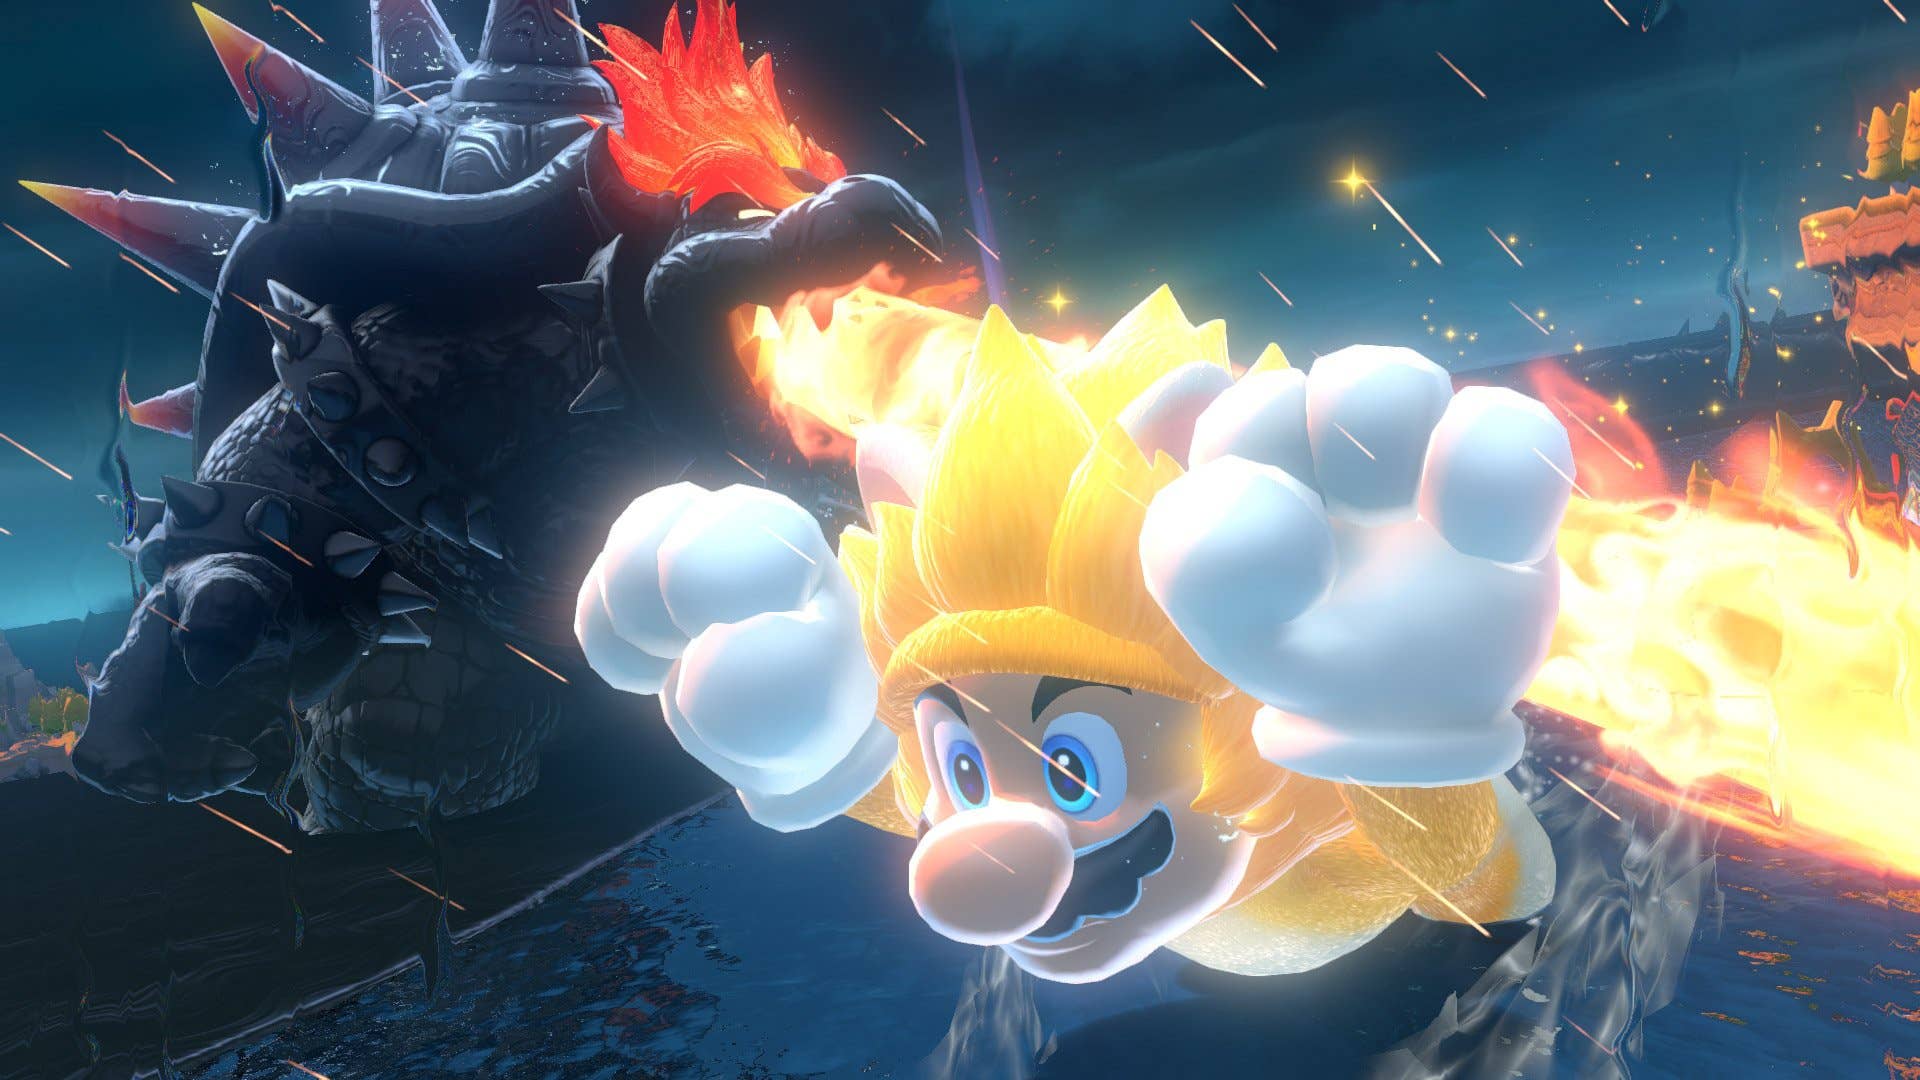 Super Mario 3D World + Bowser's Fury Was The Best-Selling Game Of February  (US)